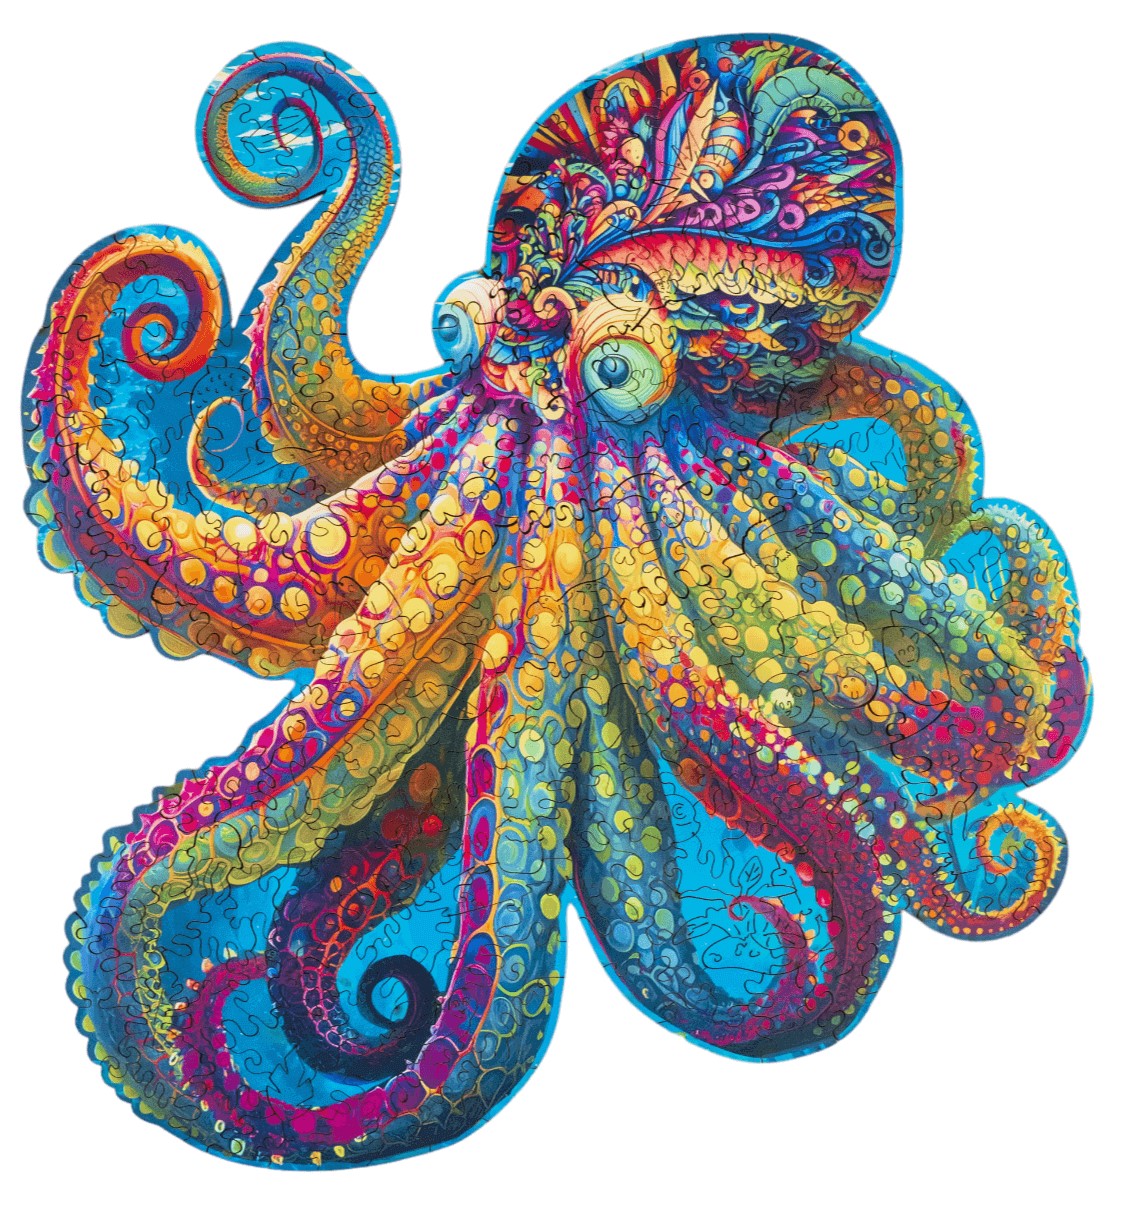 Wooden puzzles - PW019e - Rainbow octopus Image 3